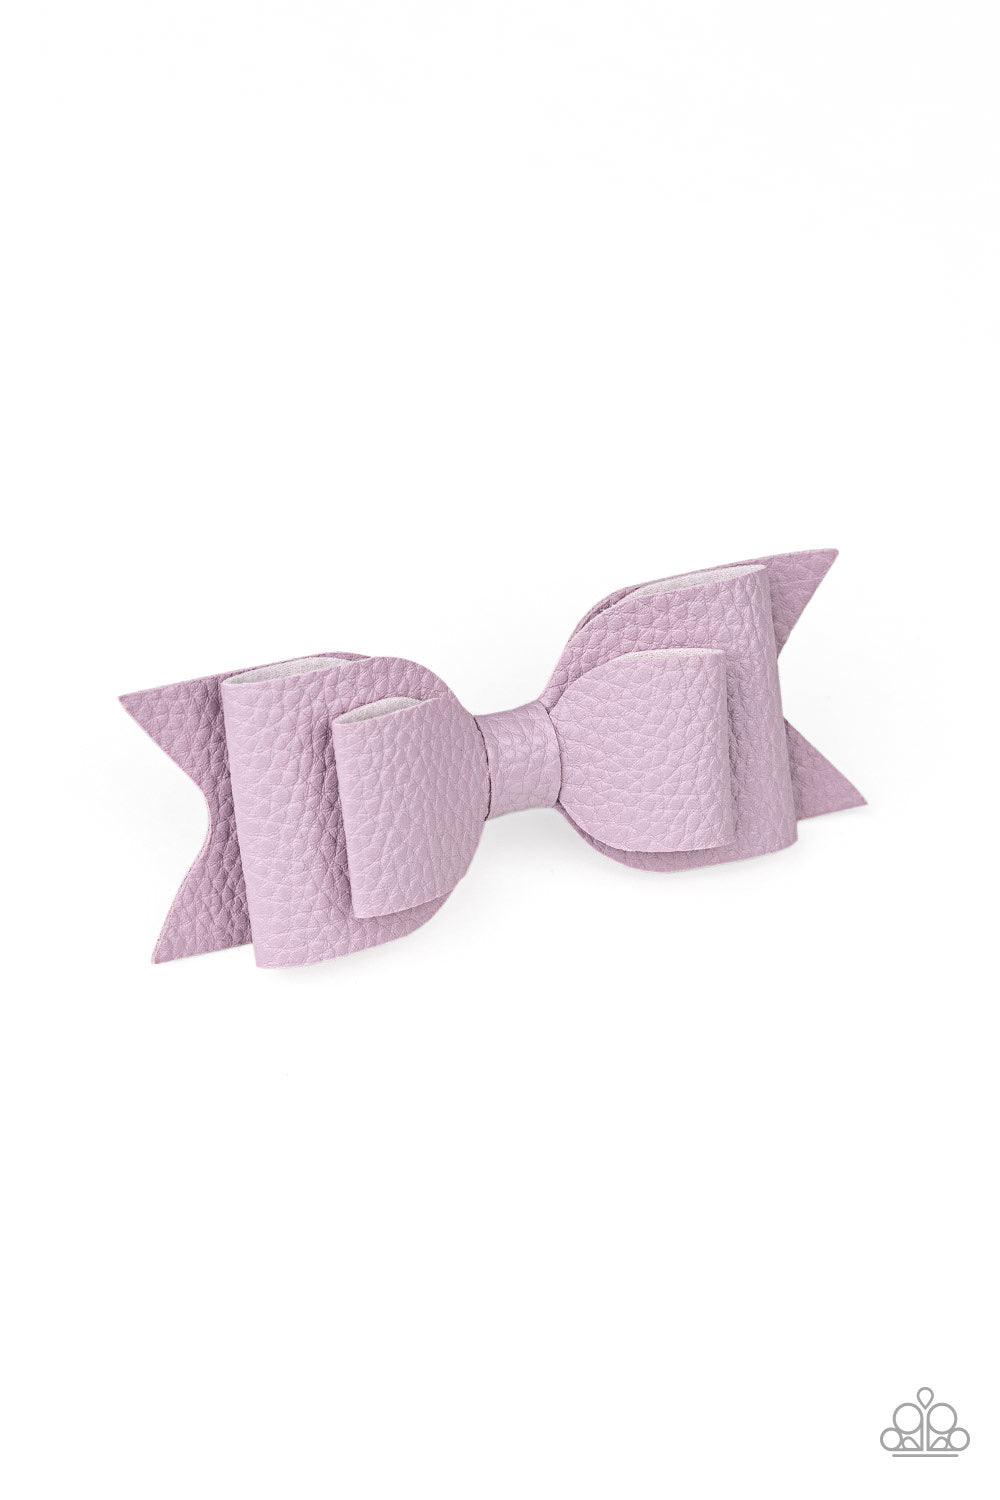 Paparazzi Accessories BOW Wow Wow - Purple Painted in a refreshing lavender finish, textured leather ties into a flirtatious hair bow. Features a standard hair clip on the back. Hair Pins